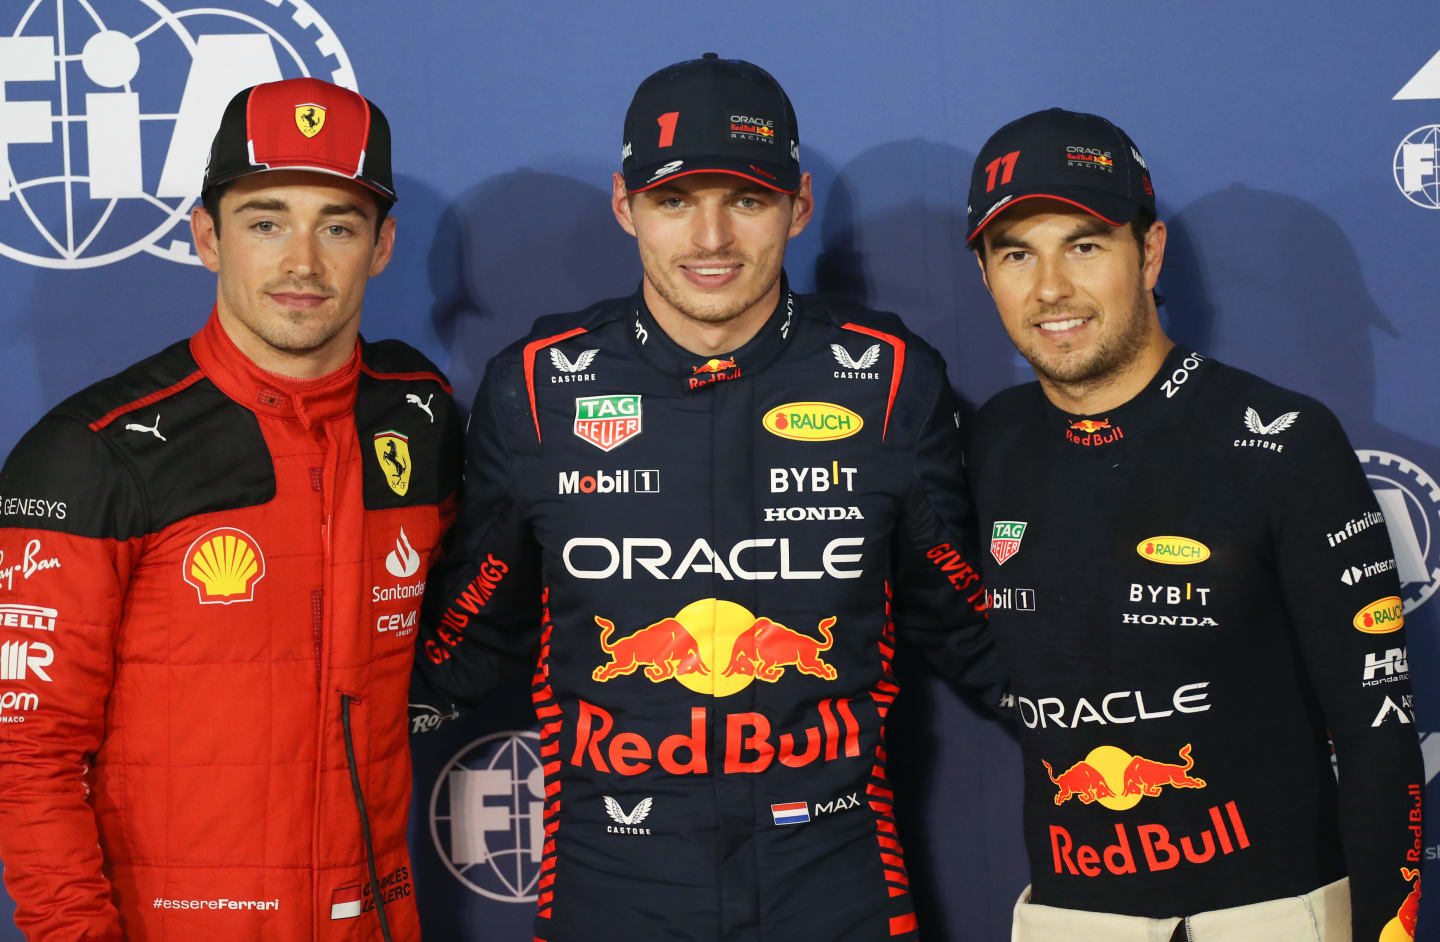 BAHRAIN, BAHRAIN - MARCH 04: Pole position qualifier Max Verstappen of the Netherlands and Oracle Red Bull Racing (C), Second placed qualifier Sergio Perez of Mexico and Oracle Red Bull Racing (R) and Third placed qualifier Charles Leclerc of Monaco and Ferrari (L) pose for a photo in parc ferme during qualifying ahead of the F1 Grand Prix of Bahrain at Bahrain International Circuit on March 04, 2023 in Bahrain, Bahrain. (Photo by Peter Fox/Getty Images)